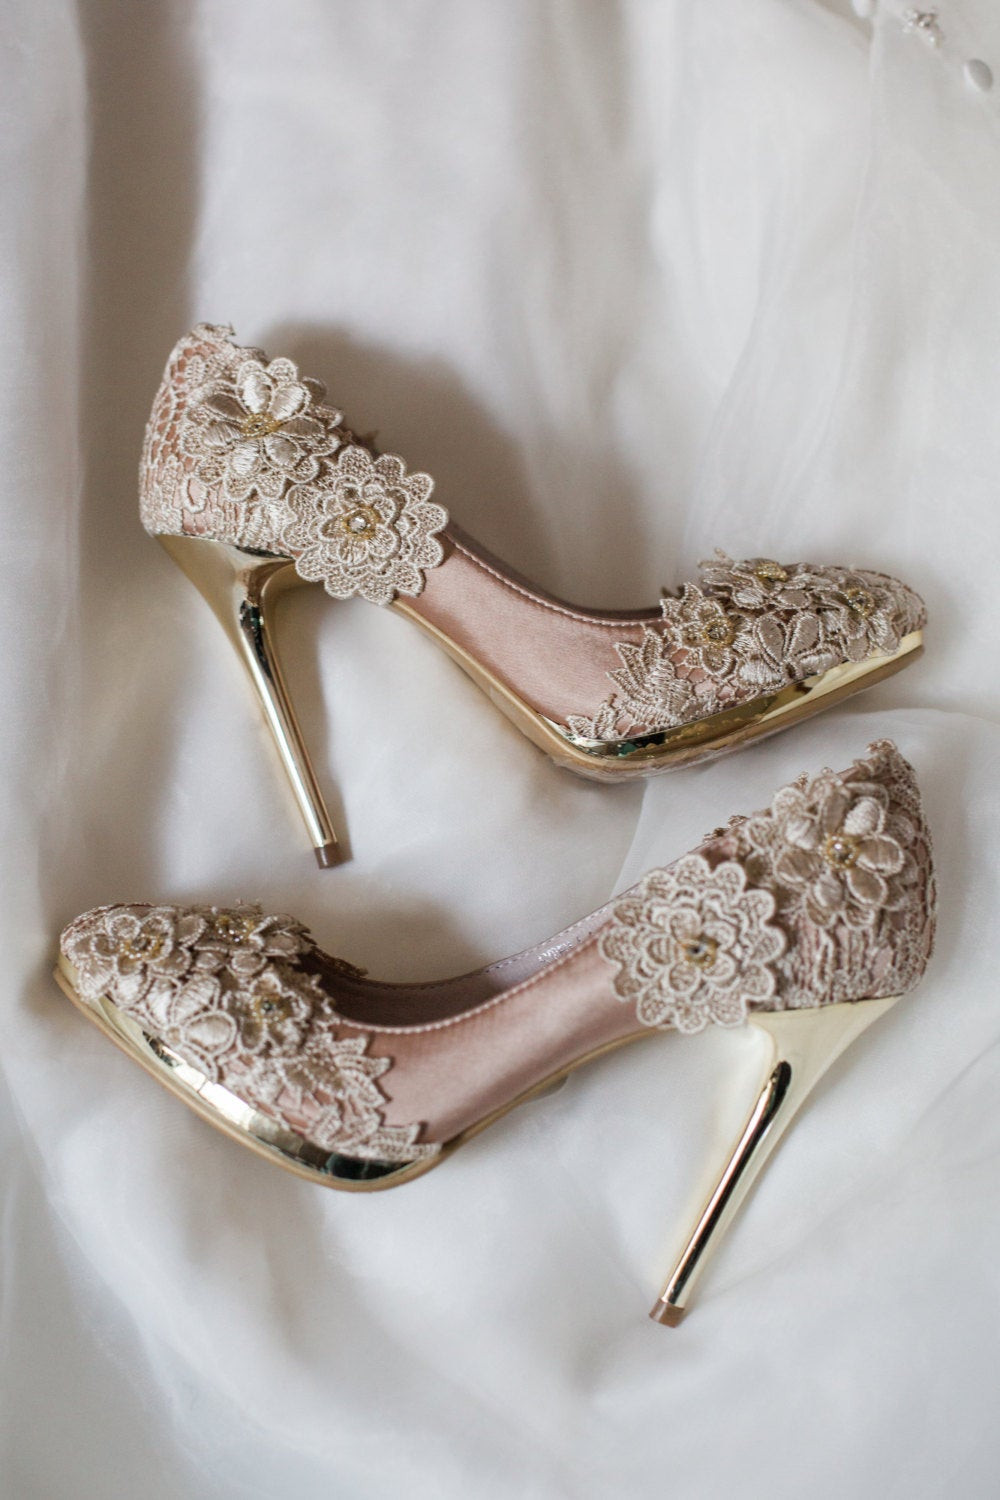 Wedding Shoes Bridal
 SALE Vintage Flower Lace Wedding Shoes with Champagne Gold